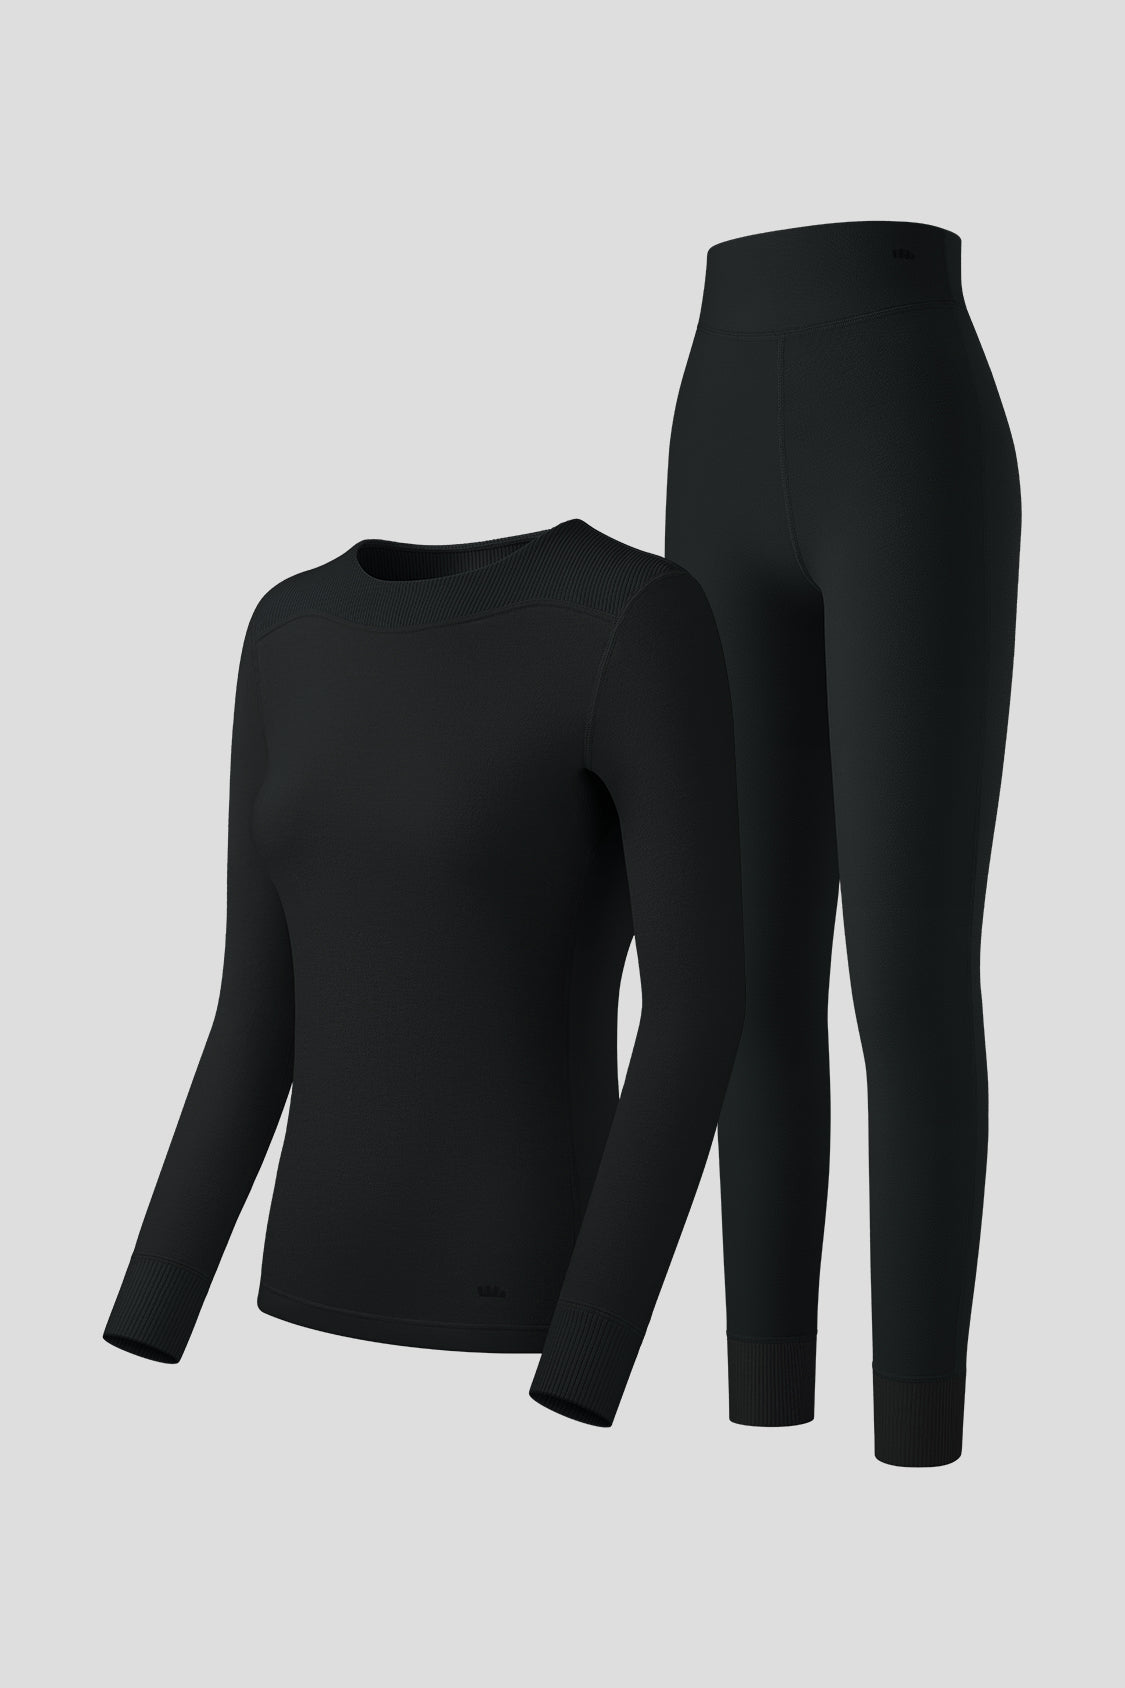 Buy Toasty Thermal Pants Adults Black Assorted online at